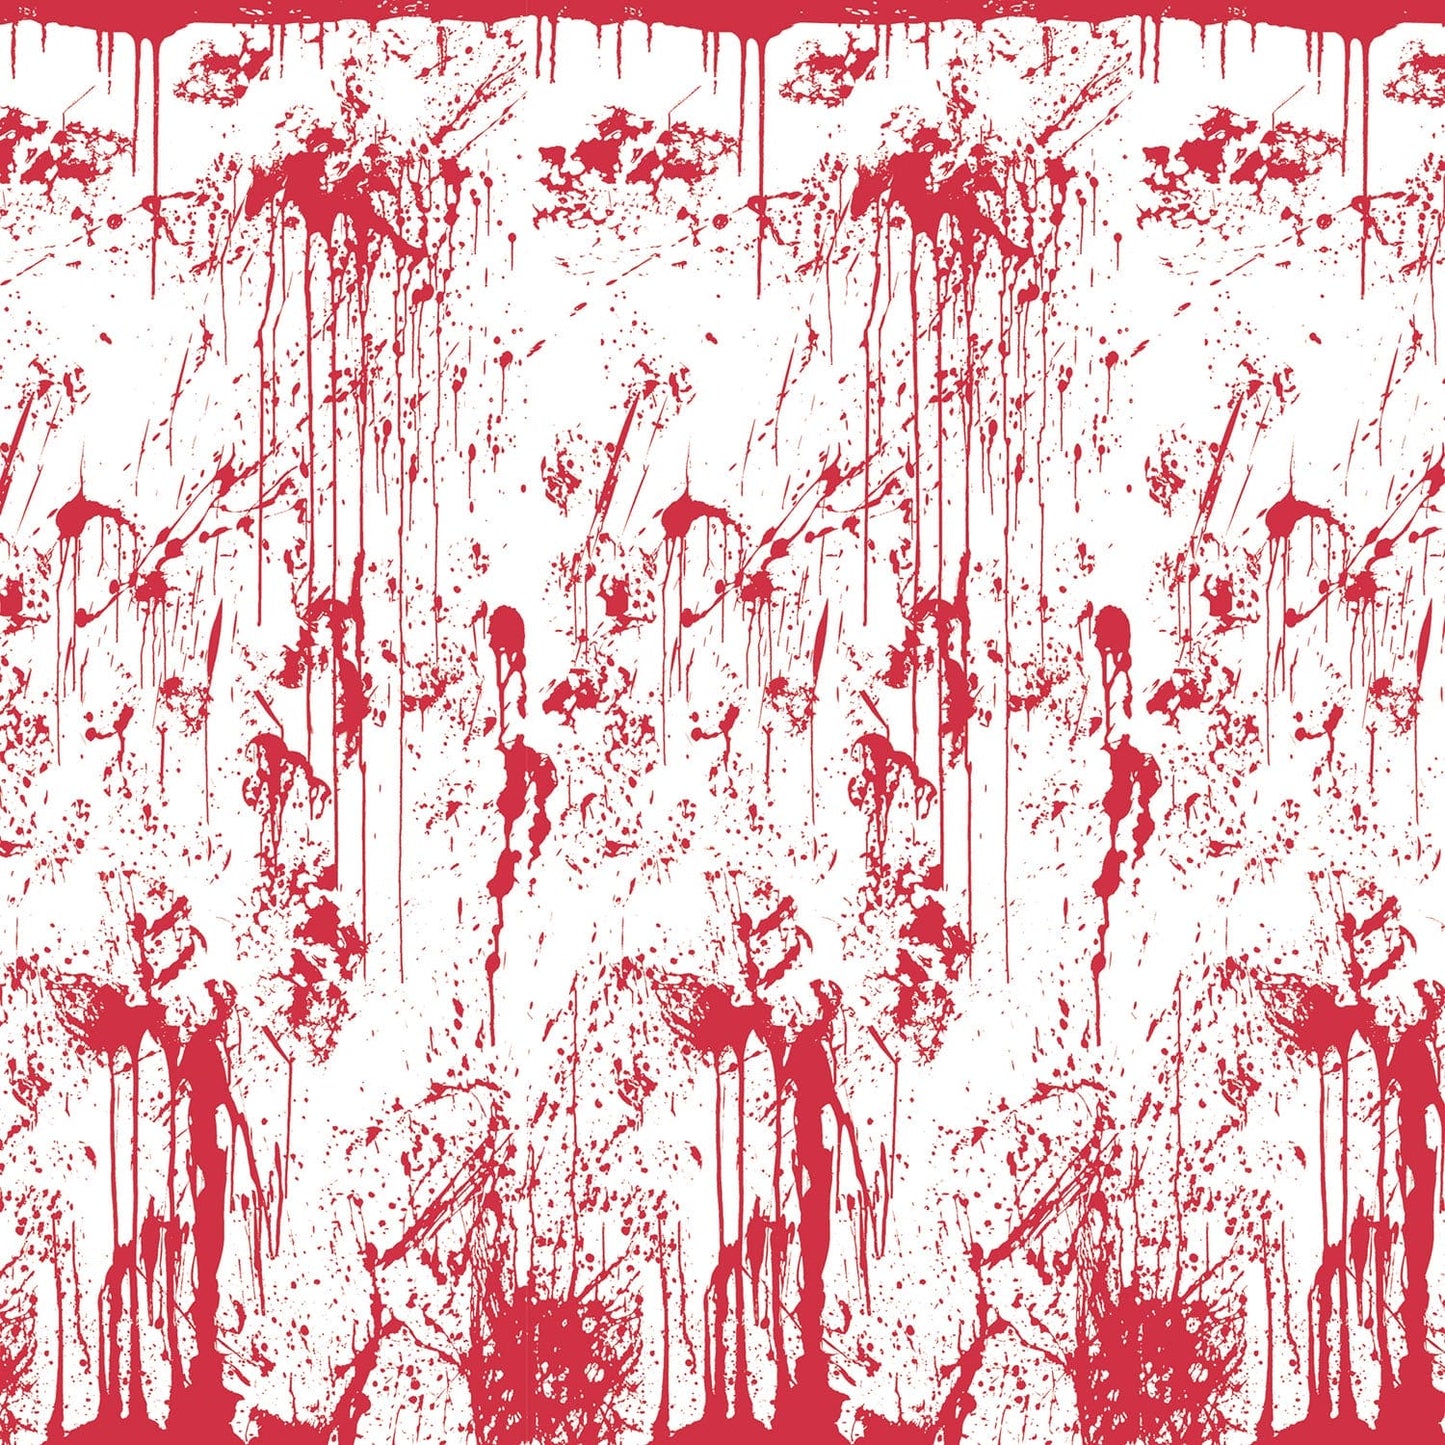 Bloody Wall Backdrop Decoration 4' x 30'